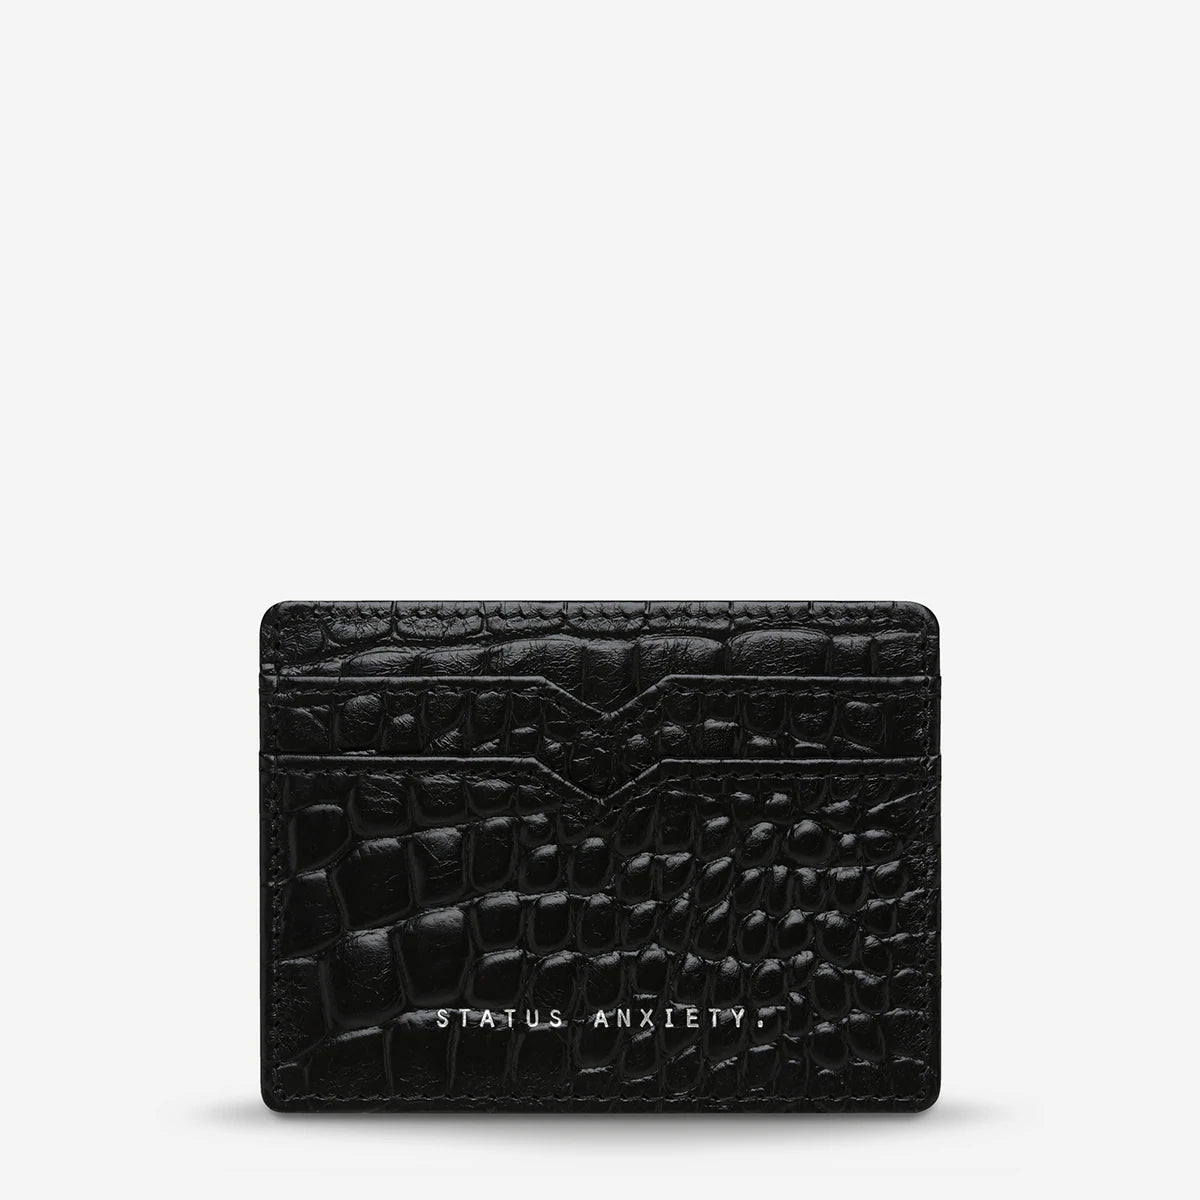 STATUS ANXIETY // Together For Now BLACK CROC EMBOSS